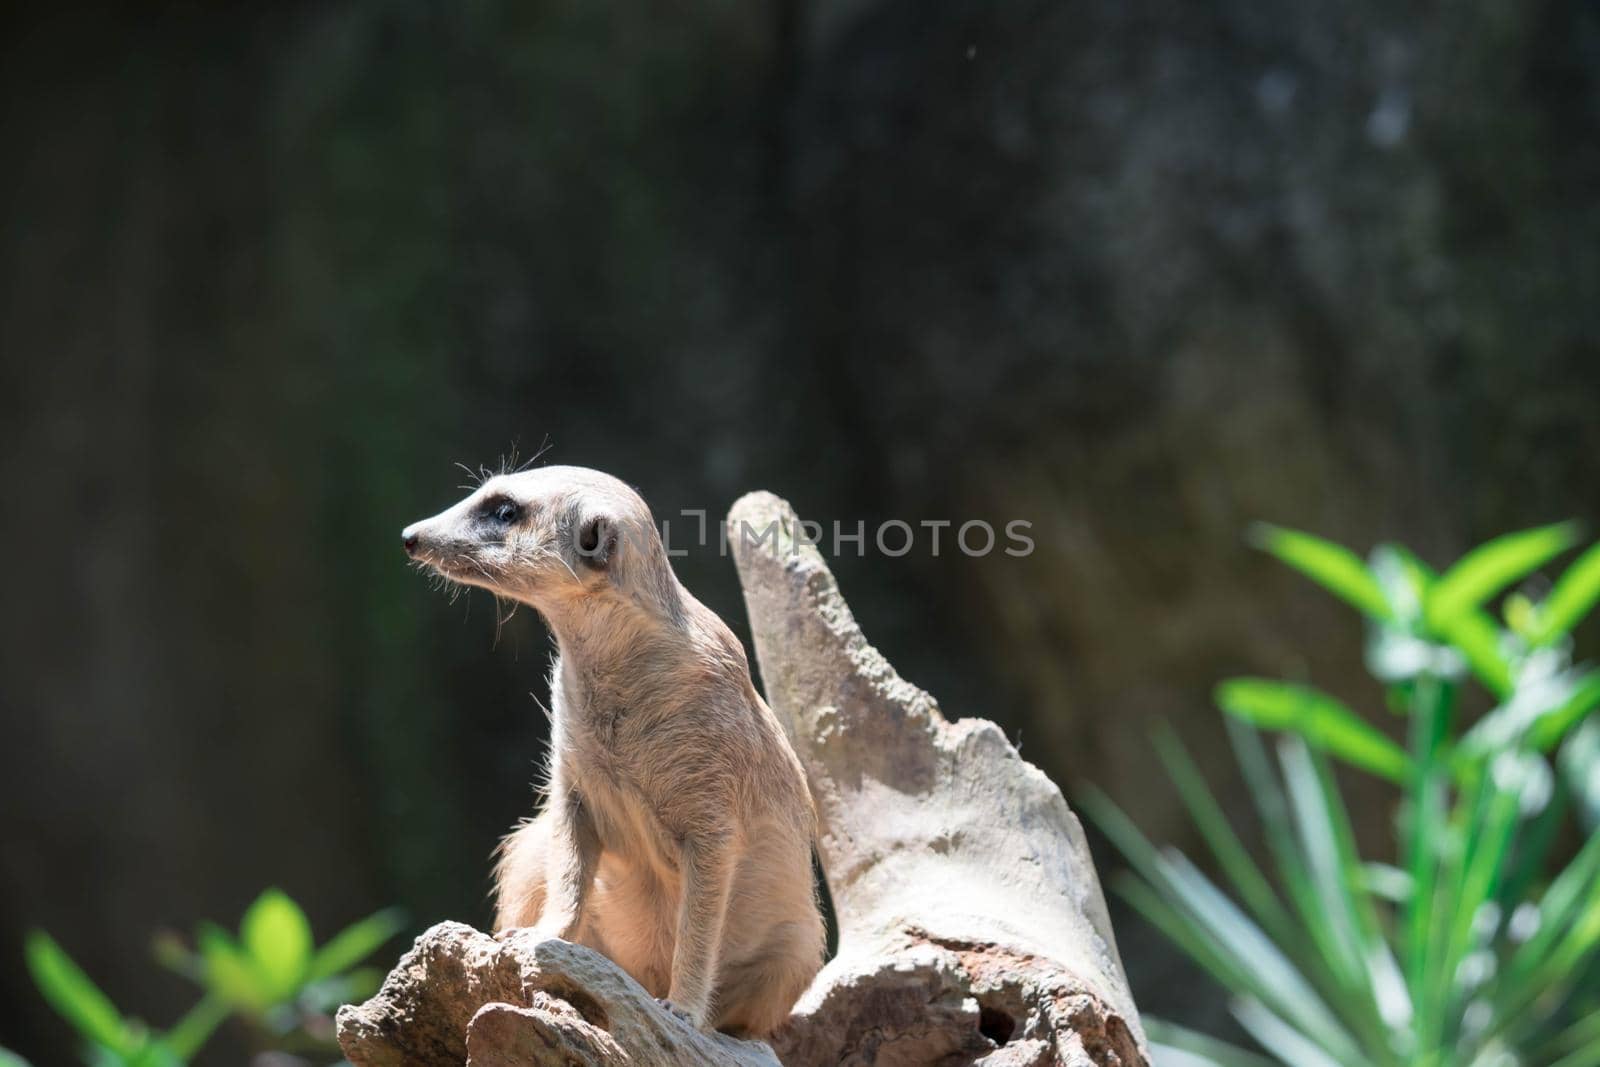 Meerkat while on a bark and observing looking around